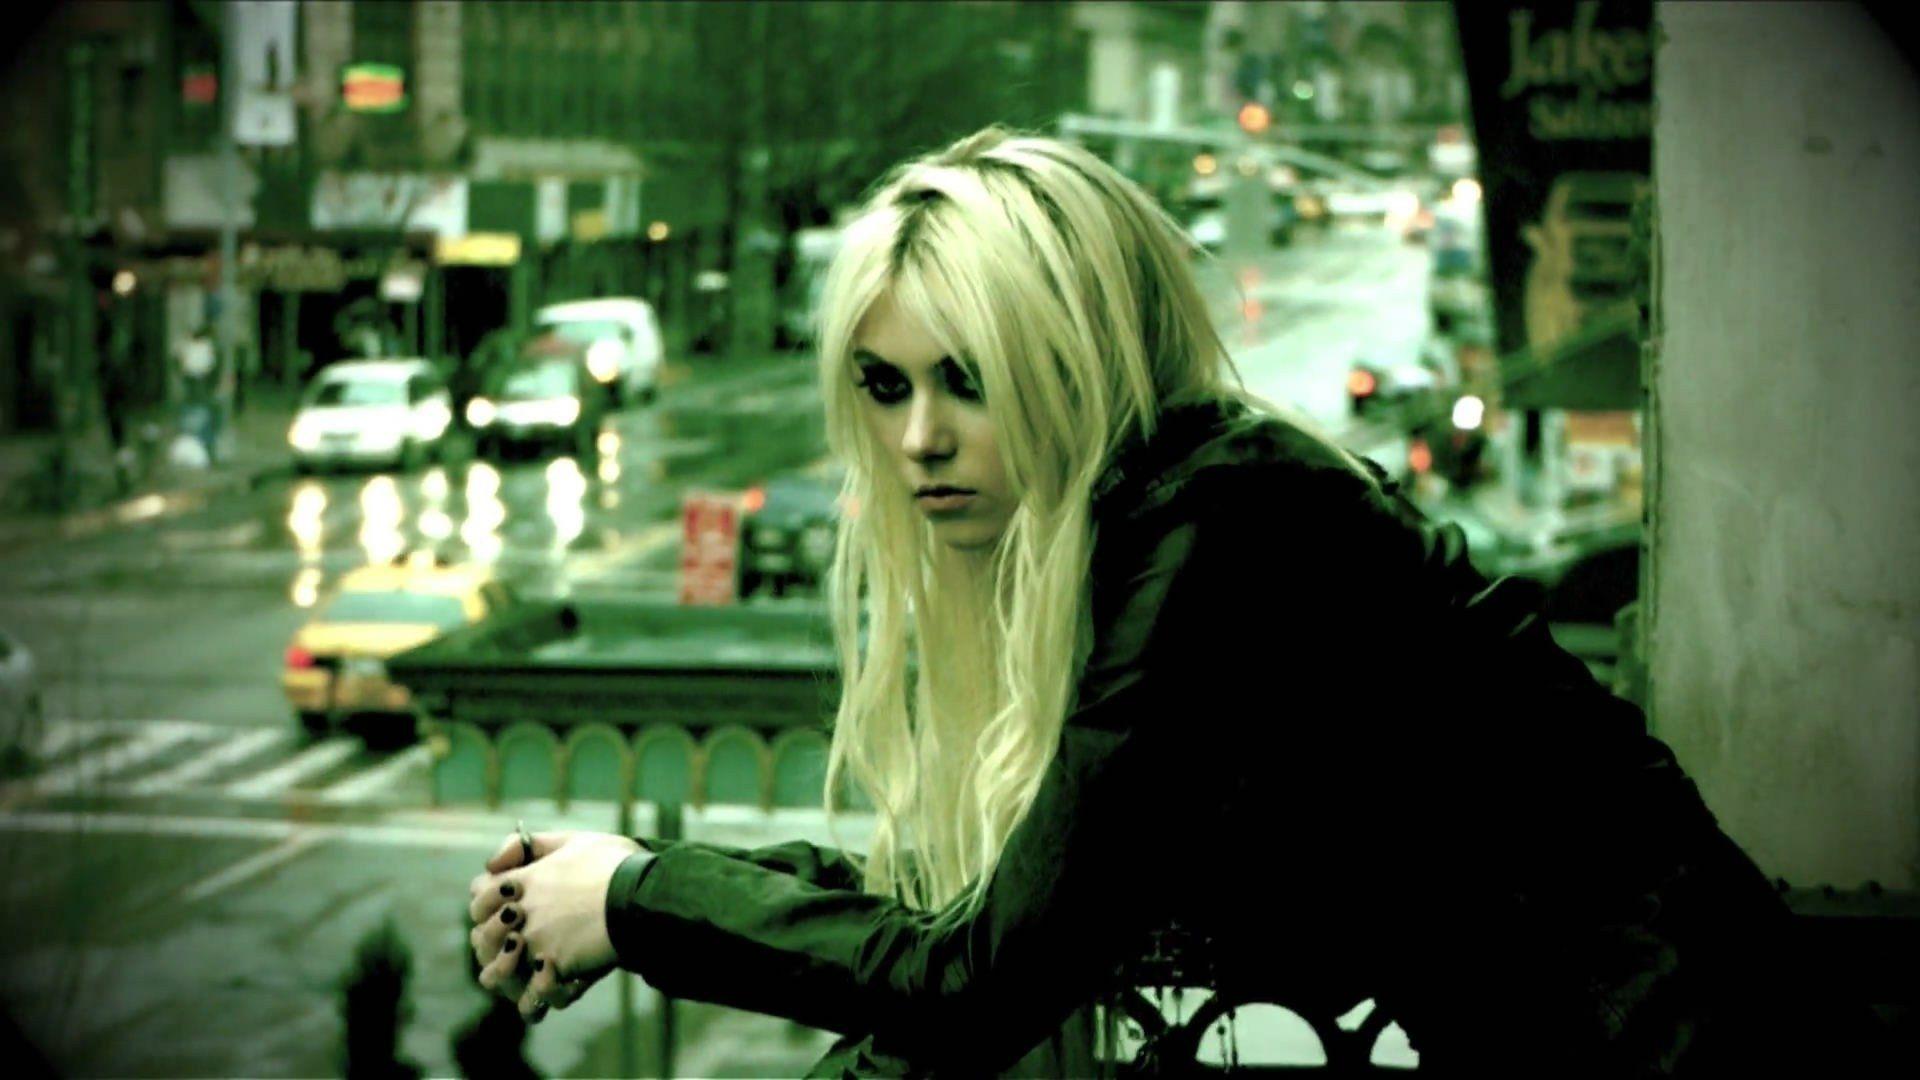 Taylor Momsen 2021 in Red Wallpapers